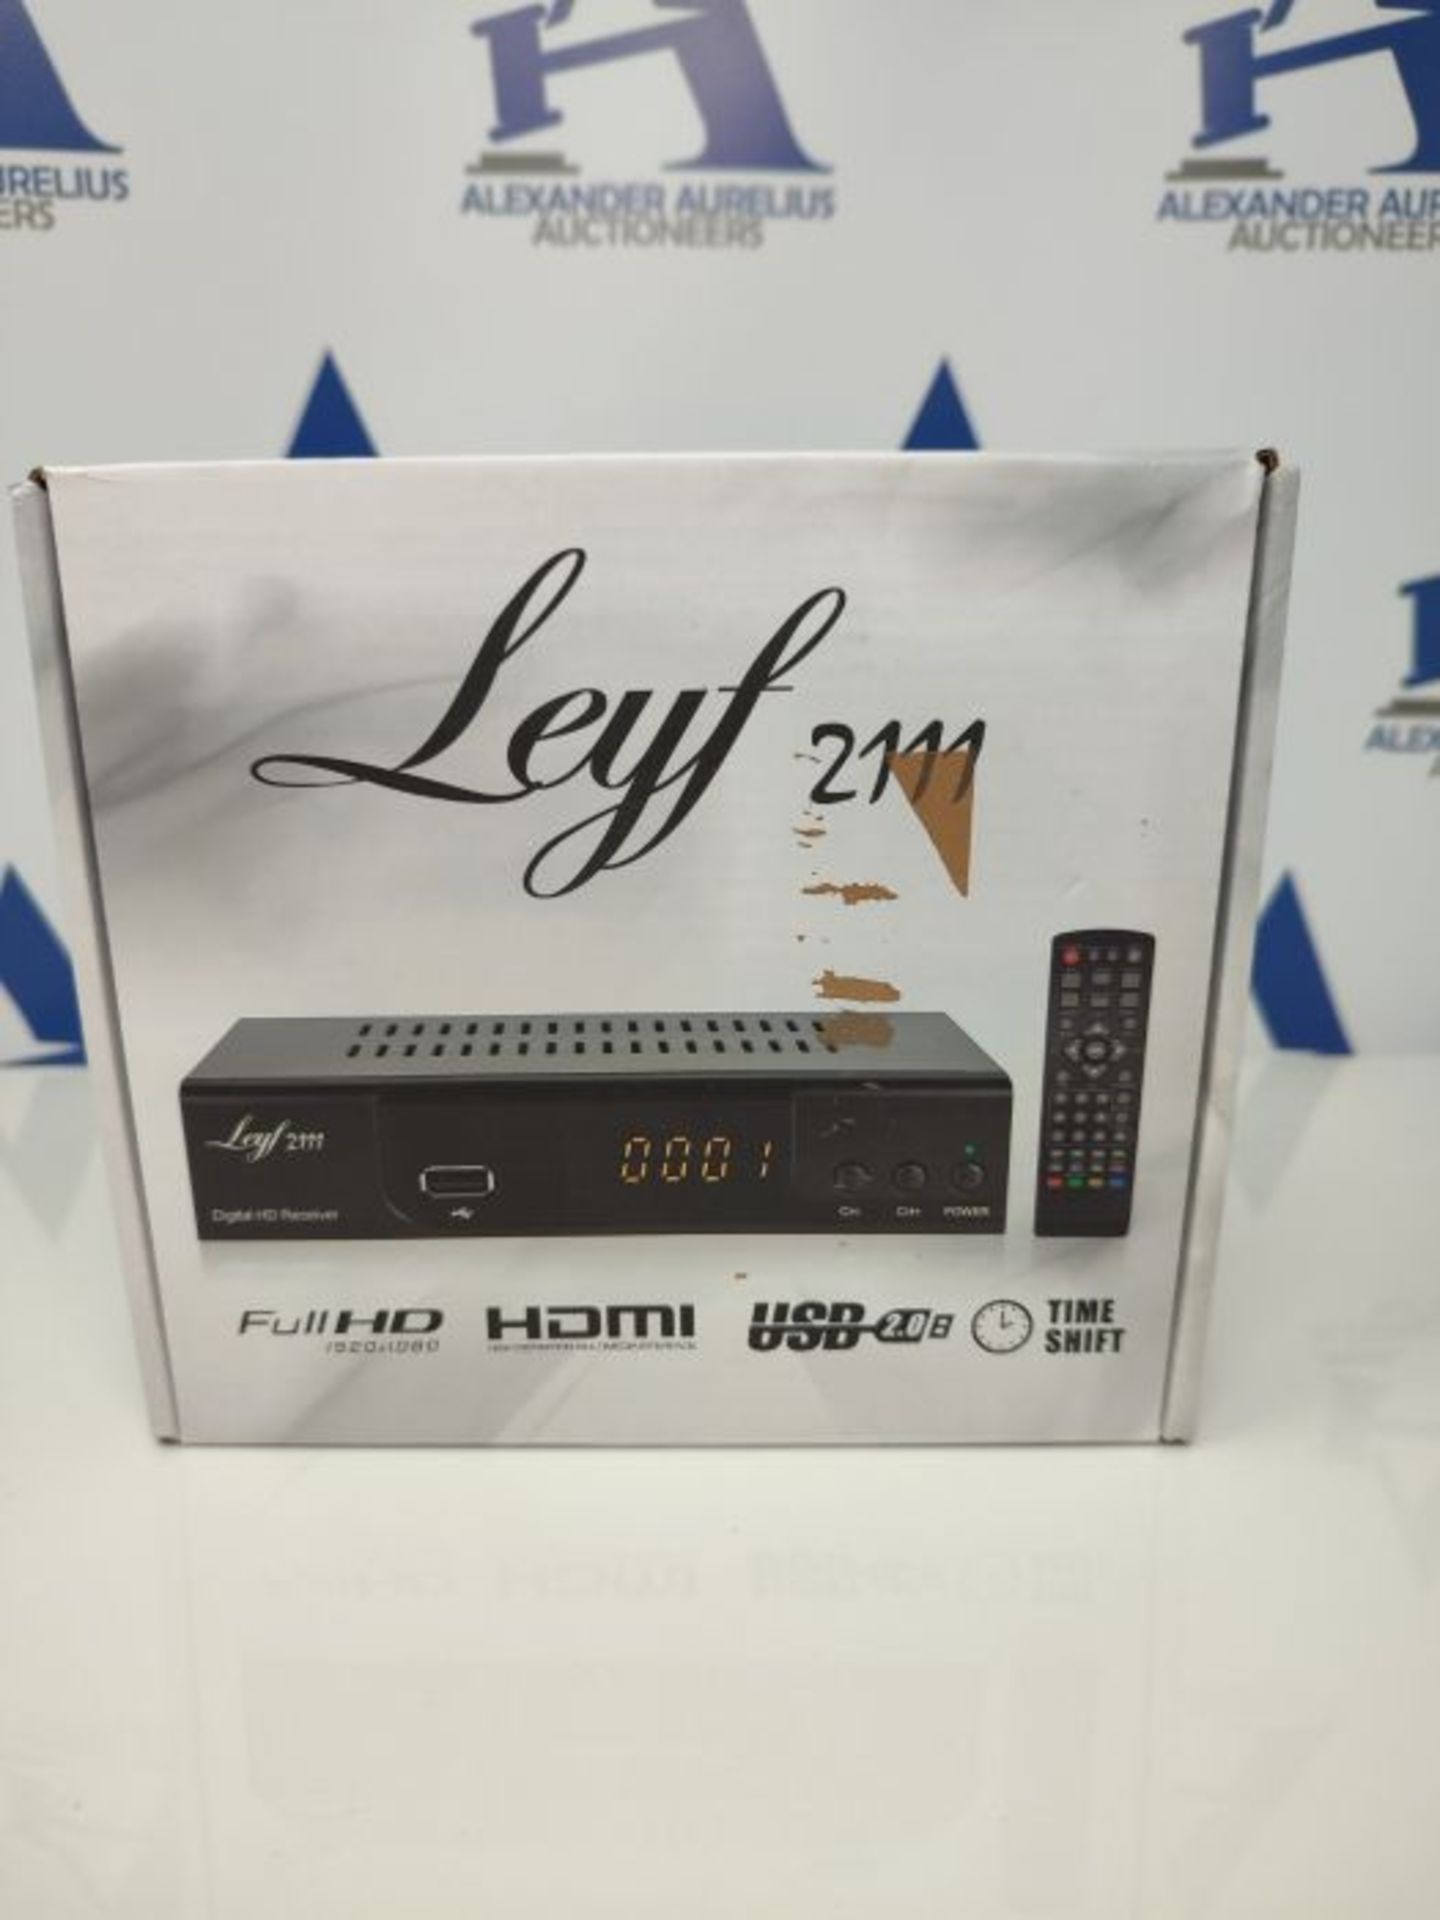 hd-line LEYF2111C Cable Receiver for Digital Cable TV - DVB-C (HDTV, DVB-C / C2, DVB-T - Image 2 of 3